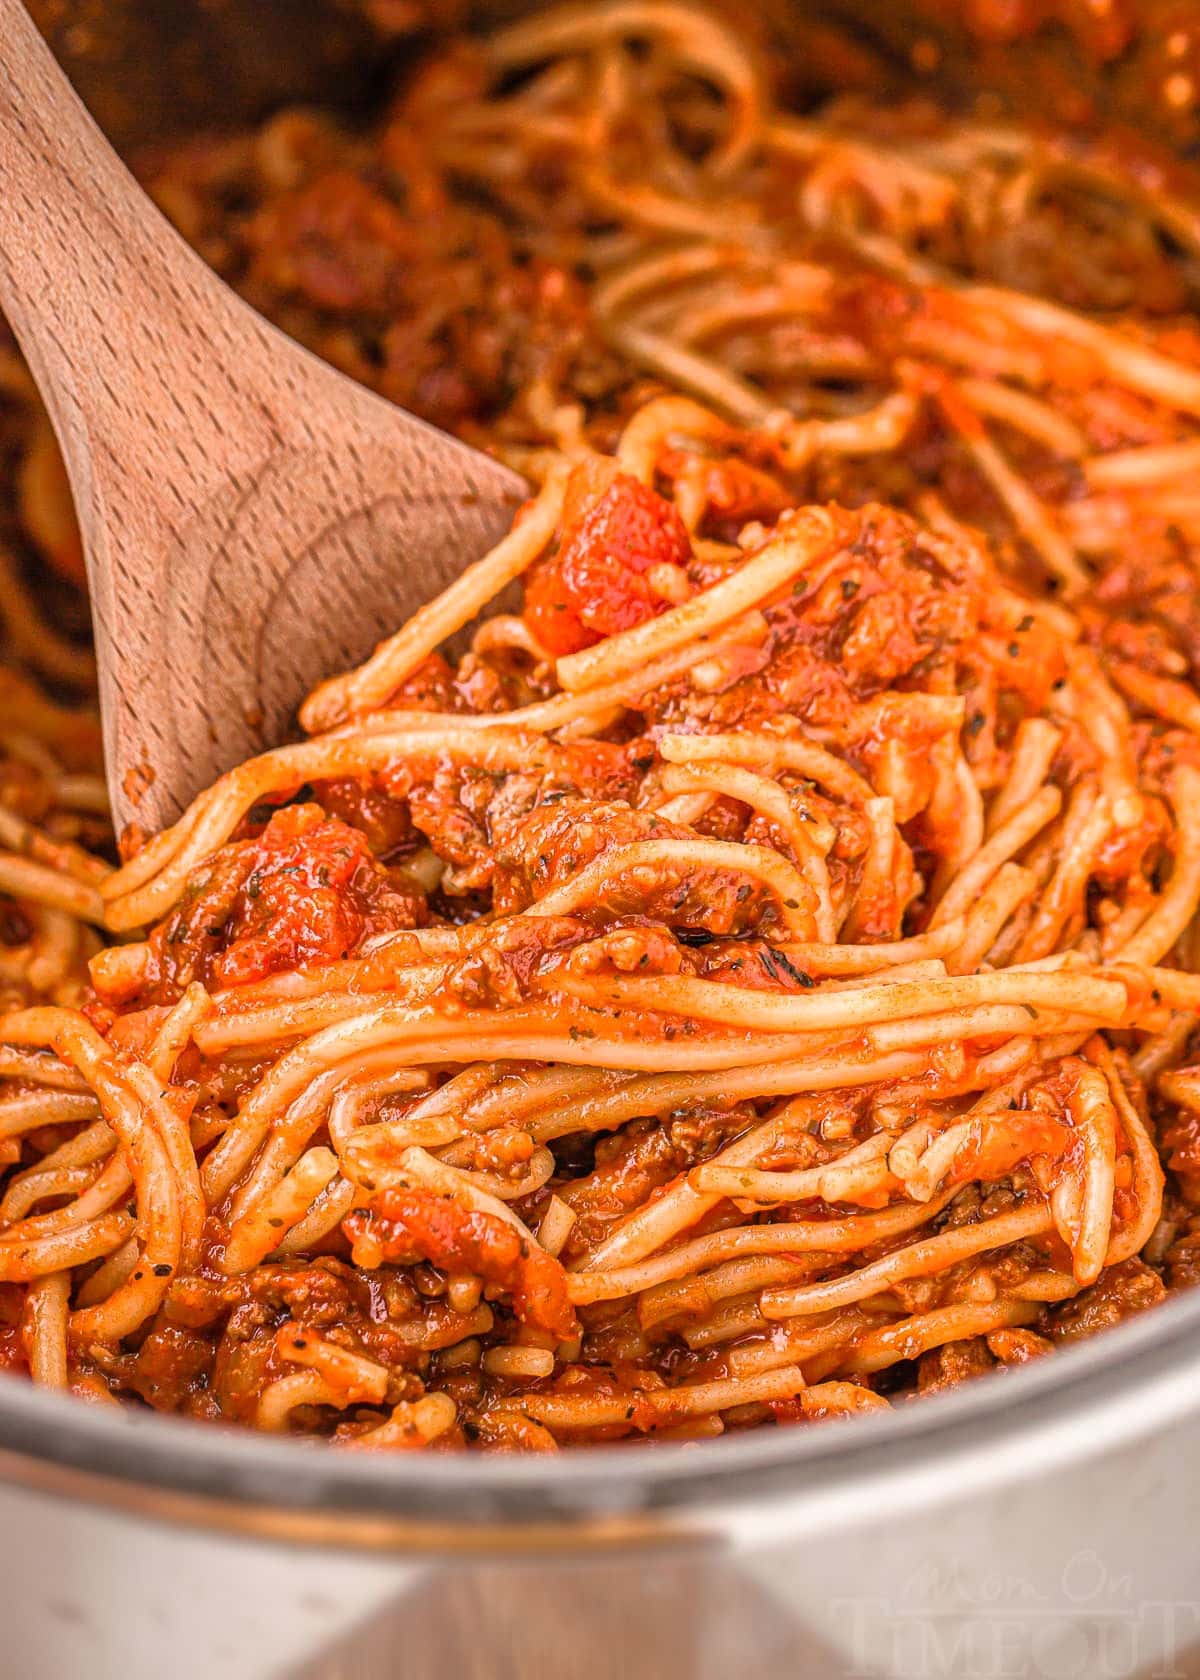 close up look at instant pot with spaghetti in it ready to be served with a wooden spoon.